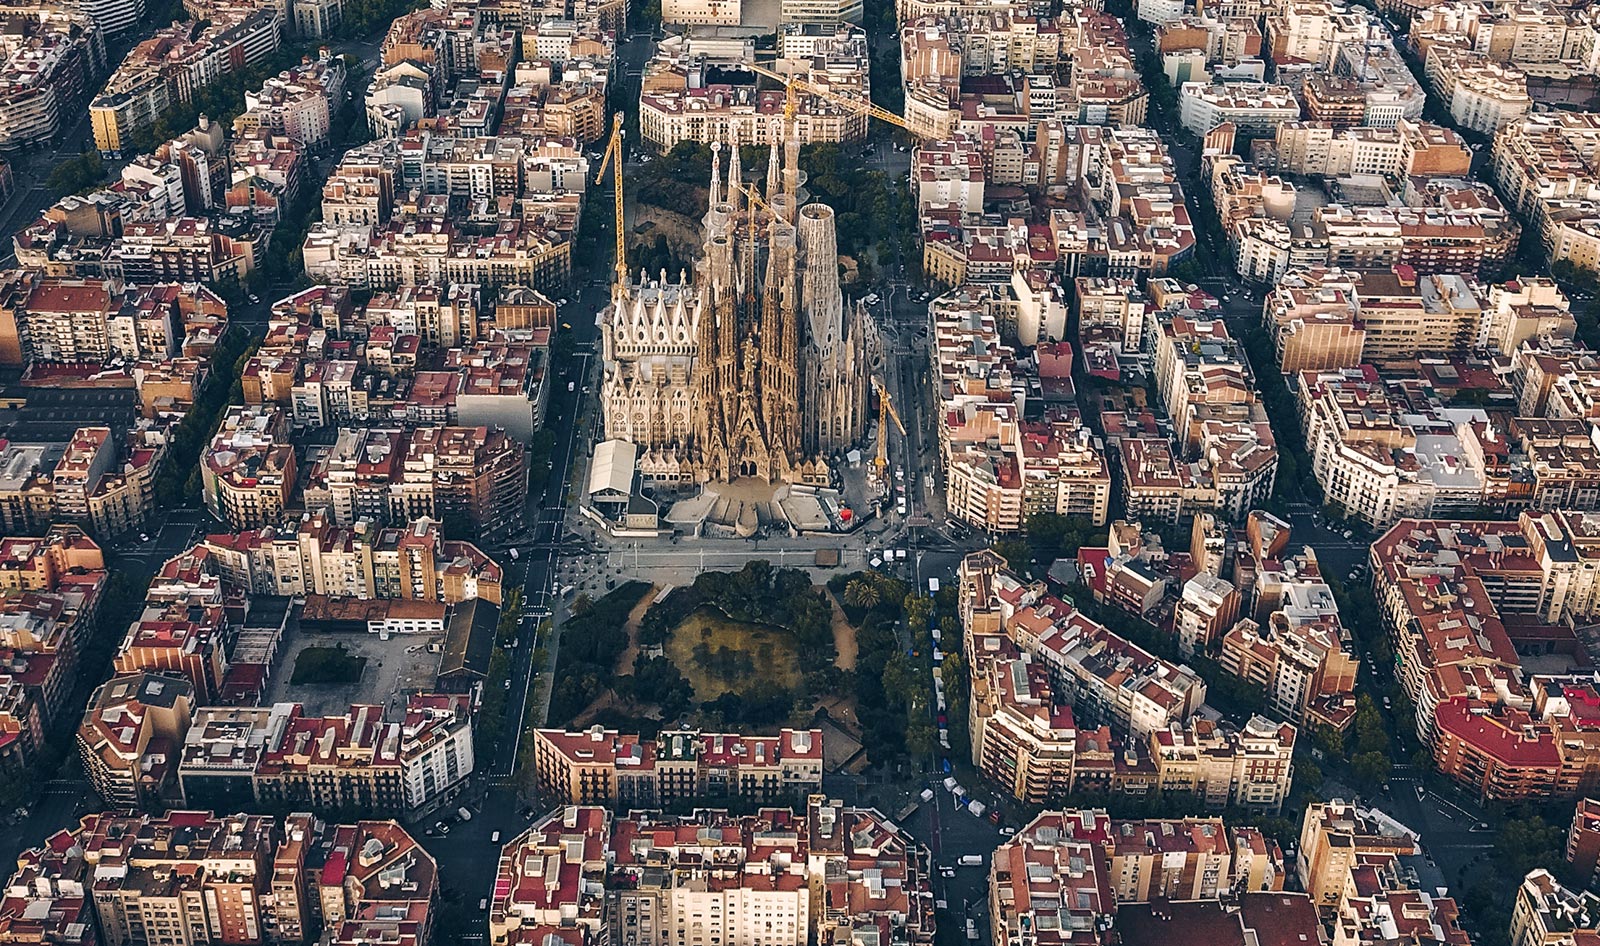 Practical information to do bussiness in Barcelona and Catalonia